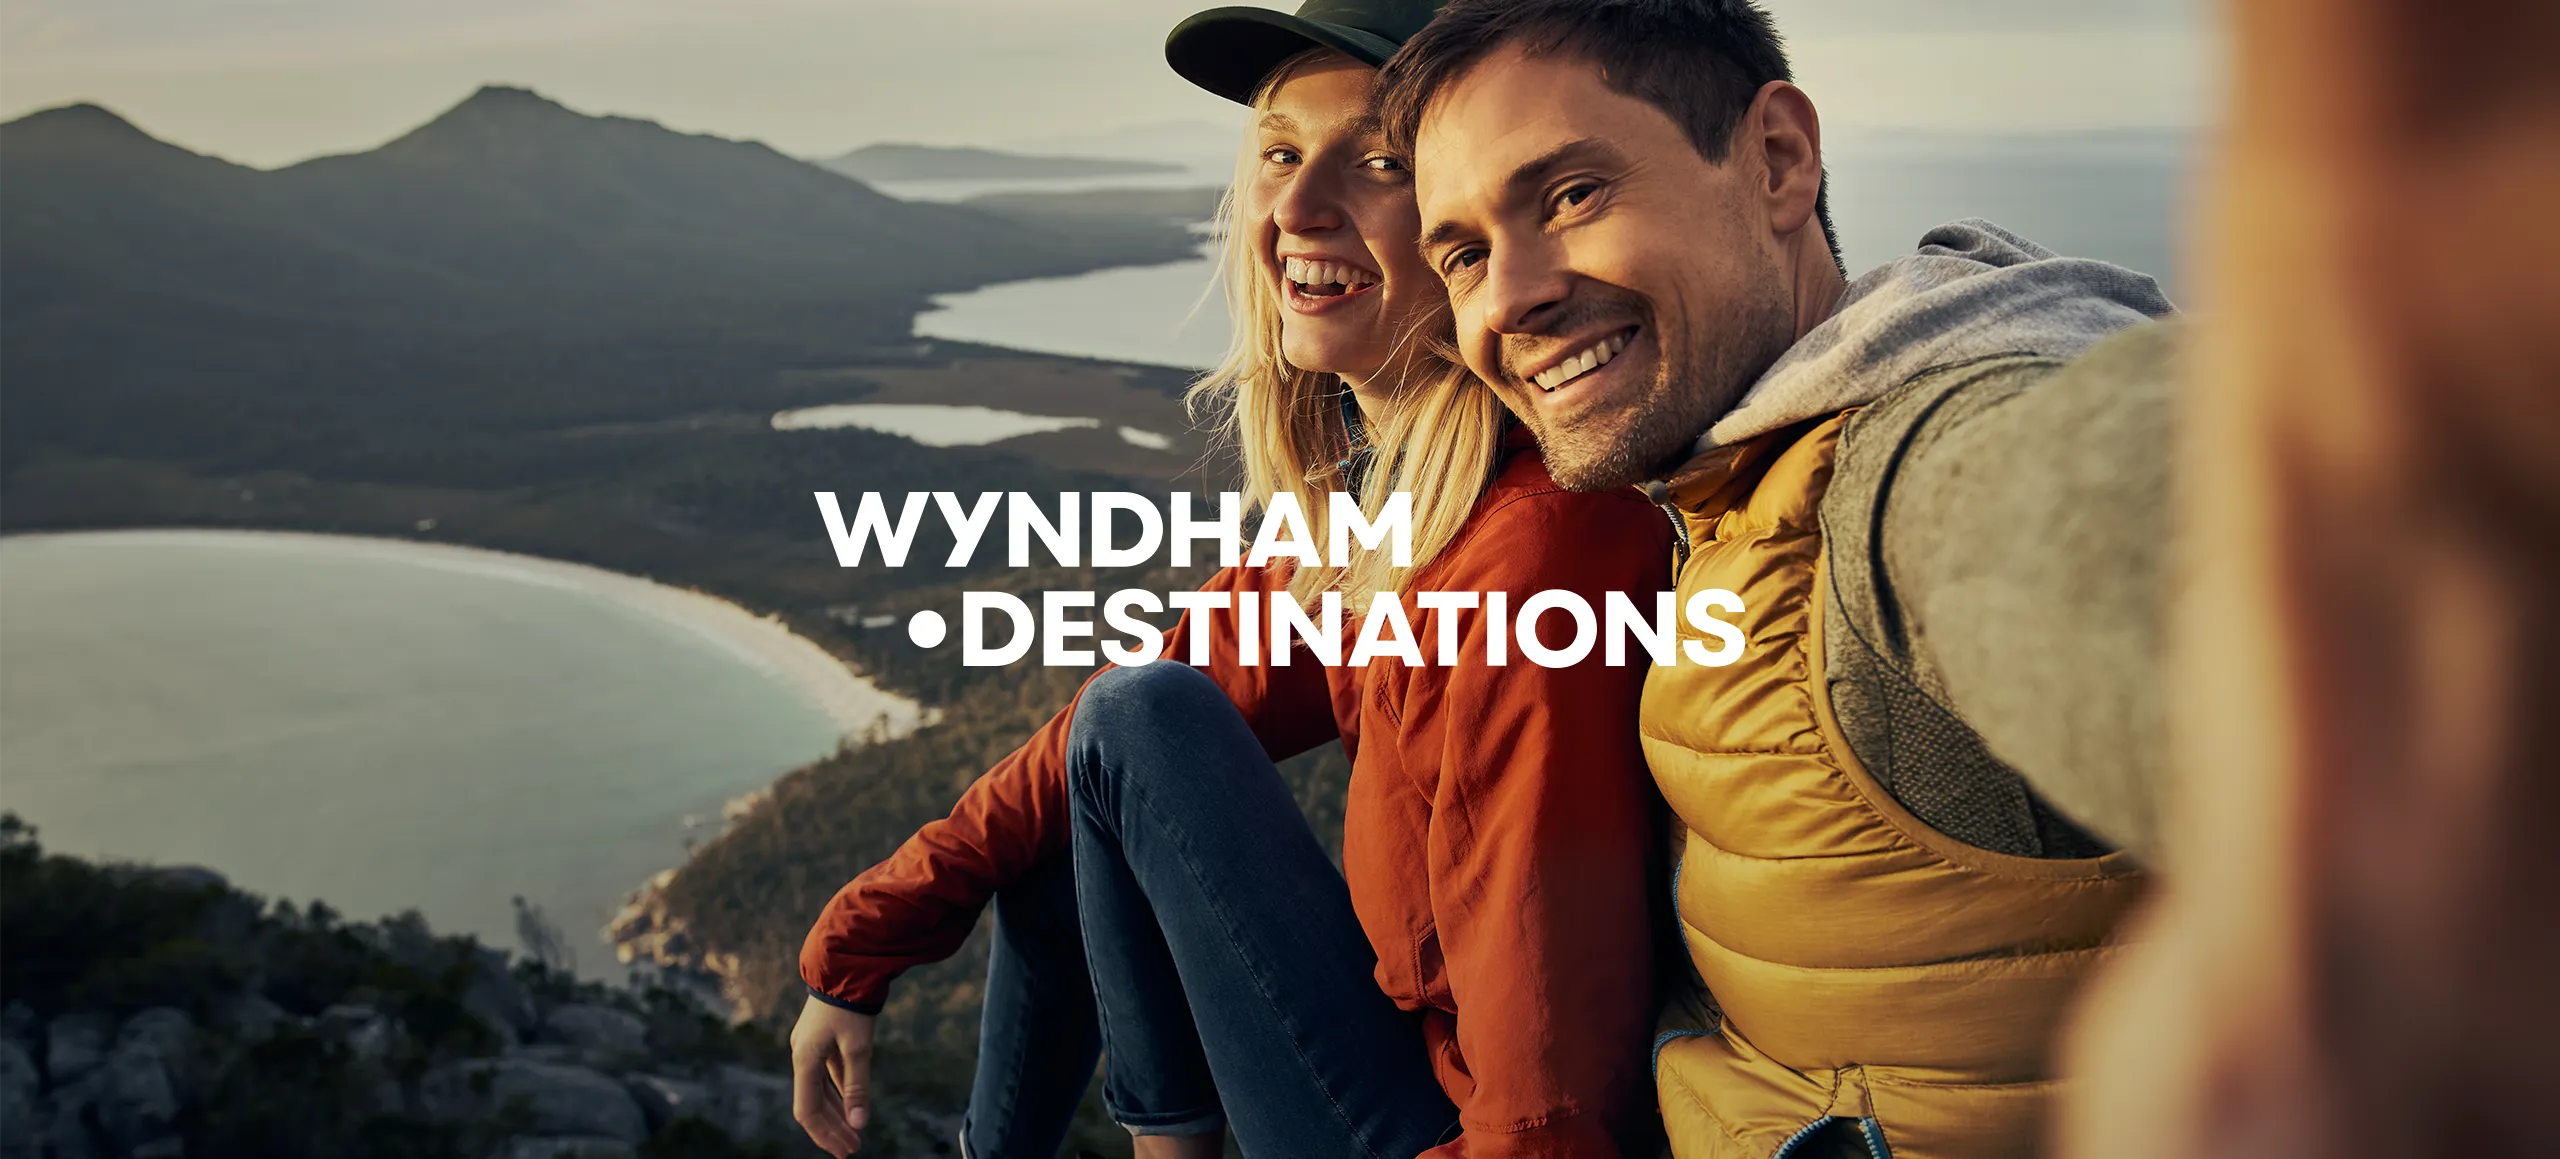 Cruising Wyndham Destinations Asia Pacific’s customers to cloud nine